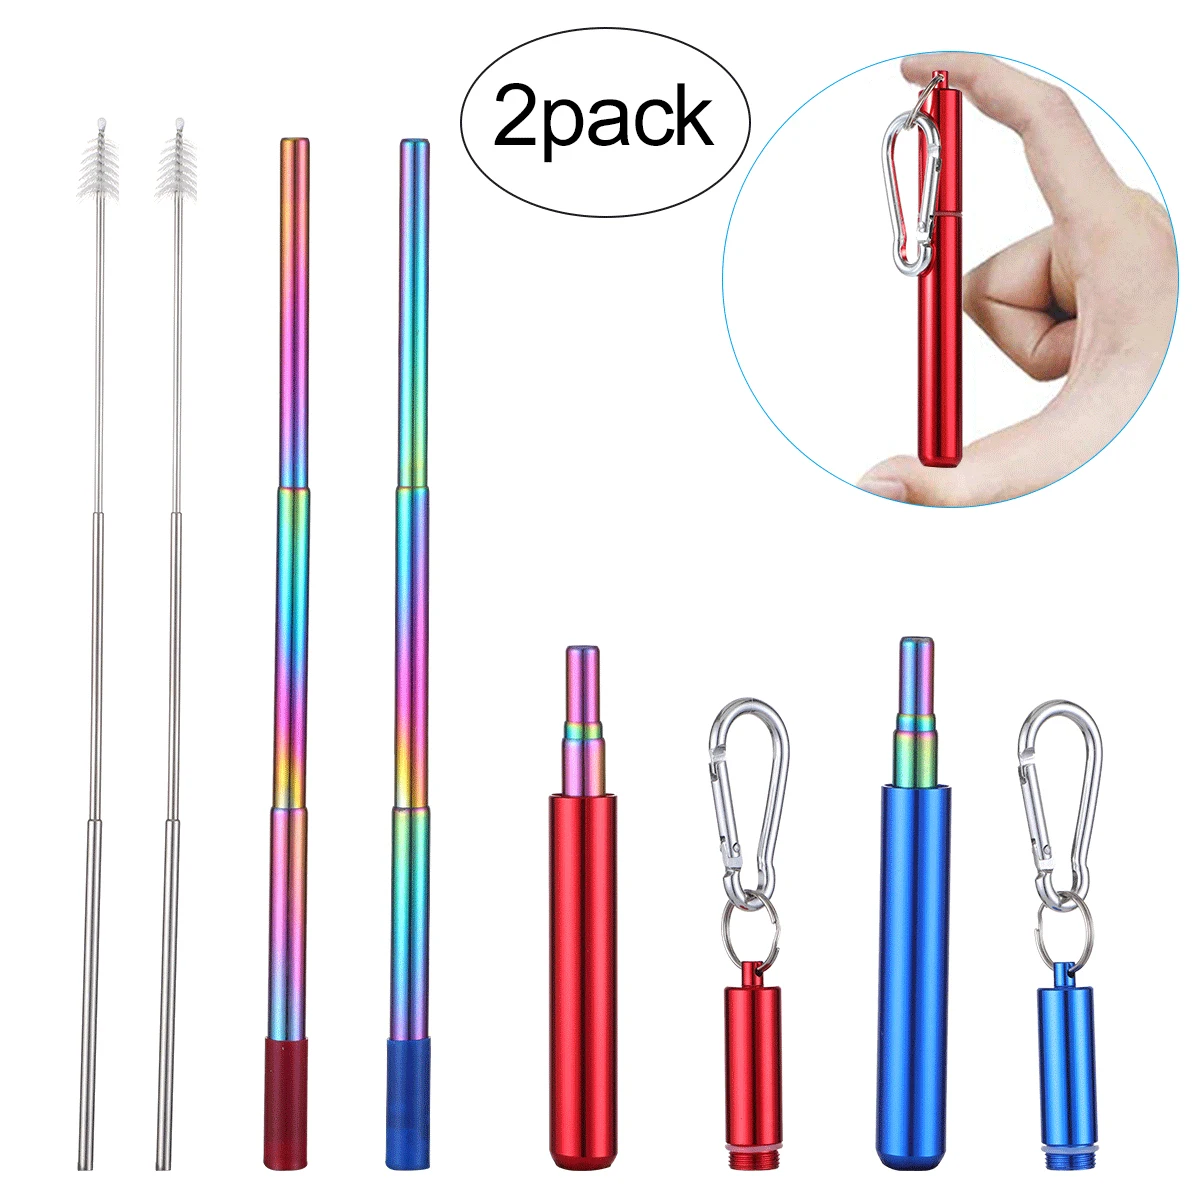 

Stainless Steel Metal Telescopic Drinking Straw Collapsible Reusable Straws Outdoor Portable Travel With Case Brush & Keychain